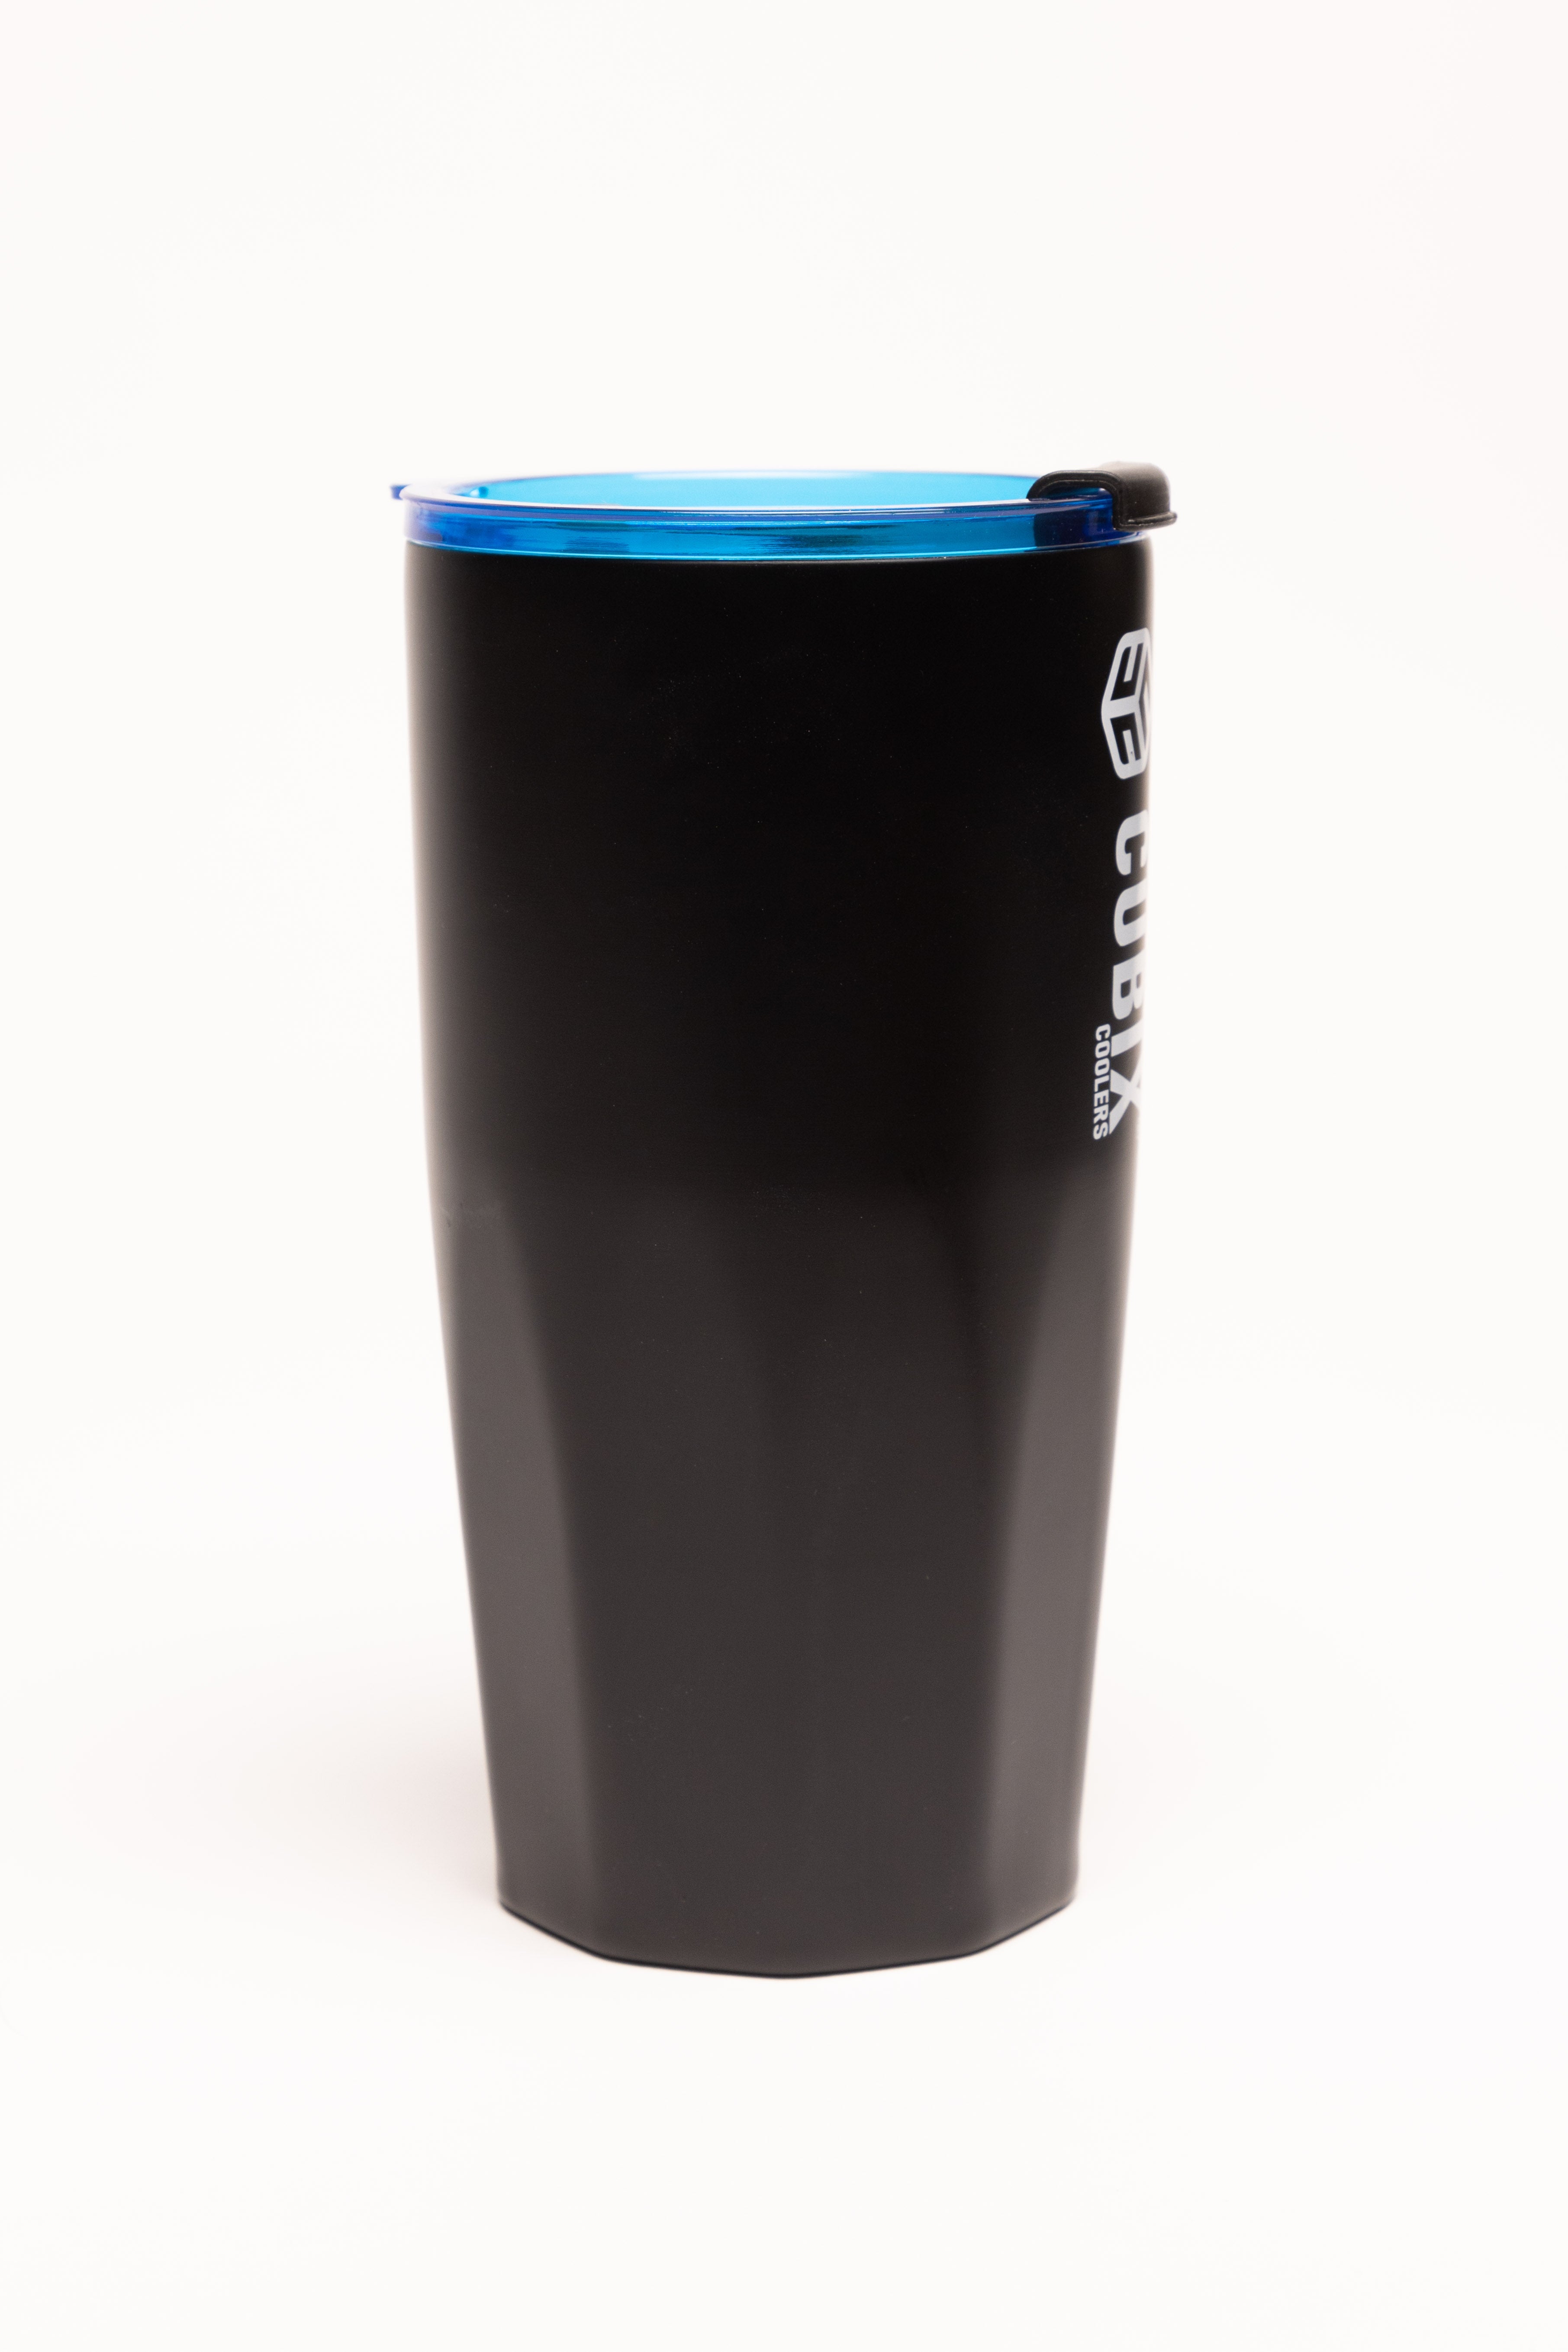 20 Ounce Tumbler - Insulated - Black with Blue Lid